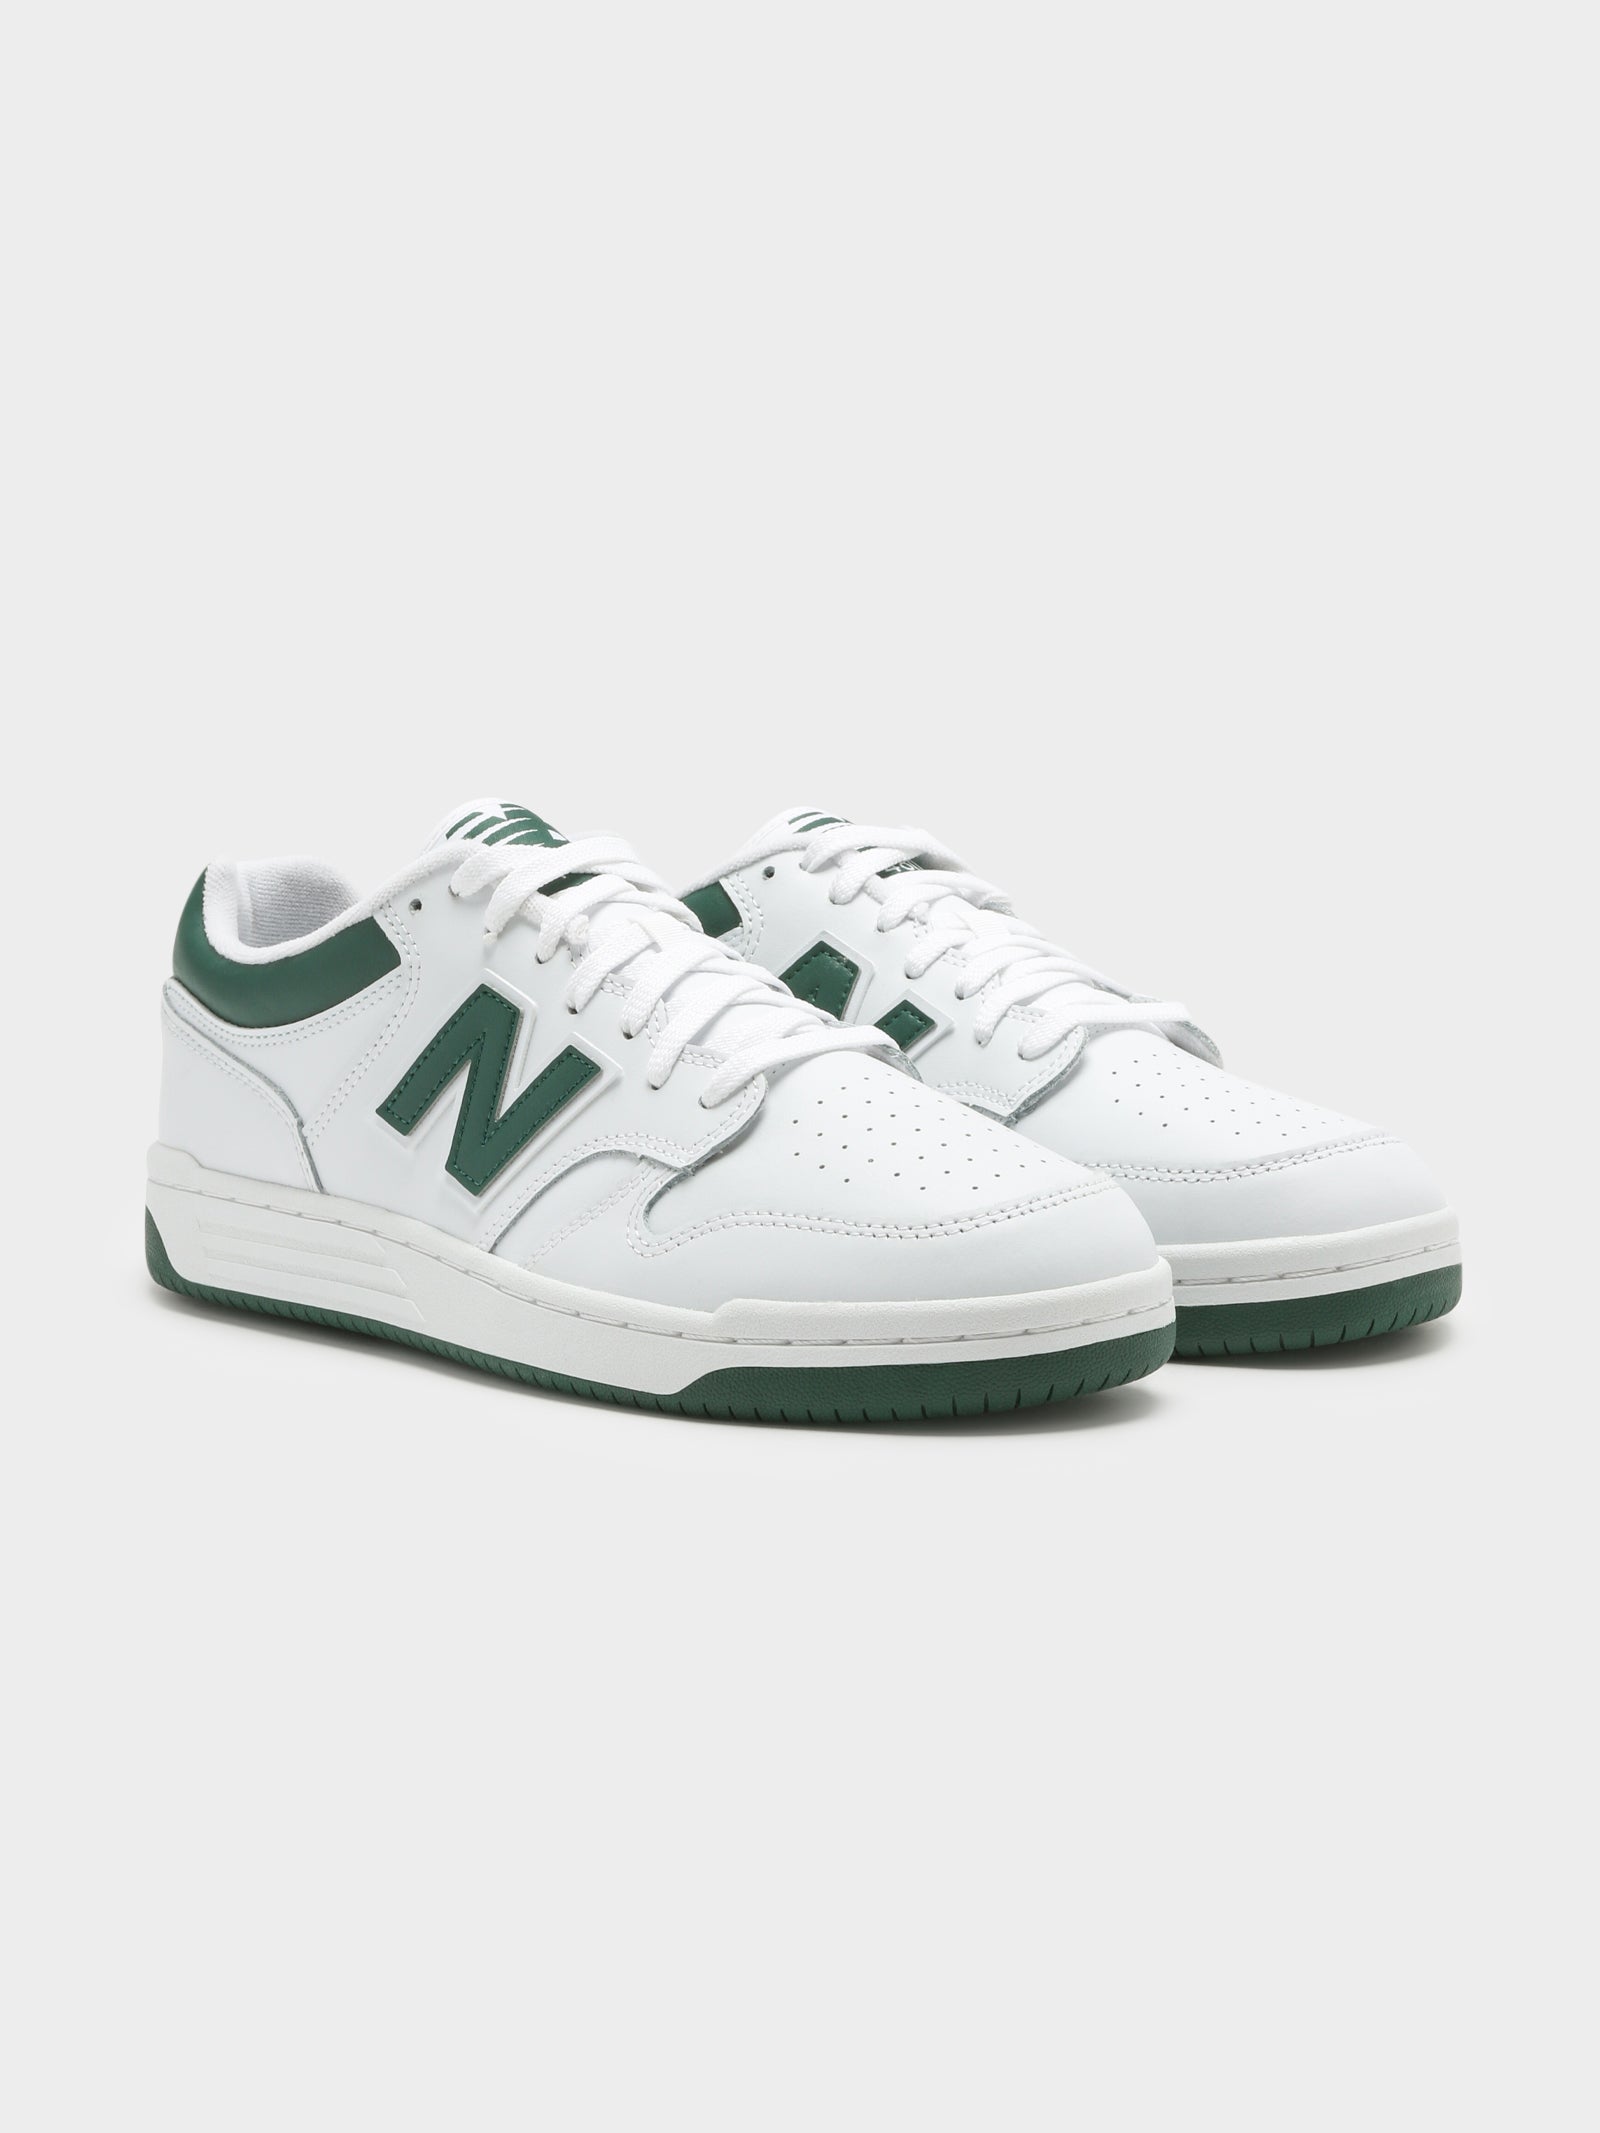 Unisex BB 480 Sneakers in White & Green